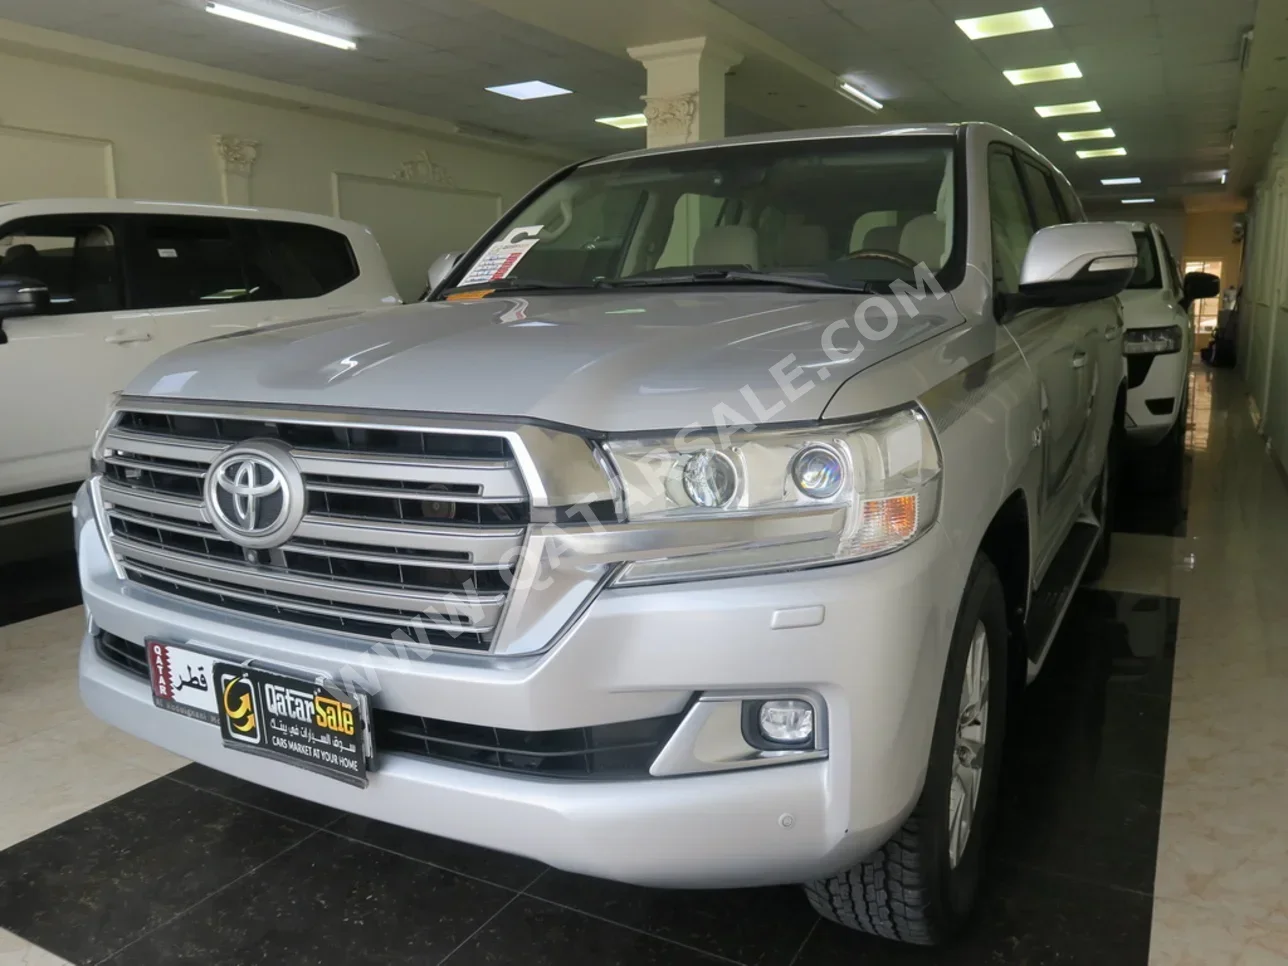  Toyota  Land Cruiser  VXR  2020  Automatic  128,000 Km  8 Cylinder  Four Wheel Drive (4WD)  SUV  Silver  With Warranty